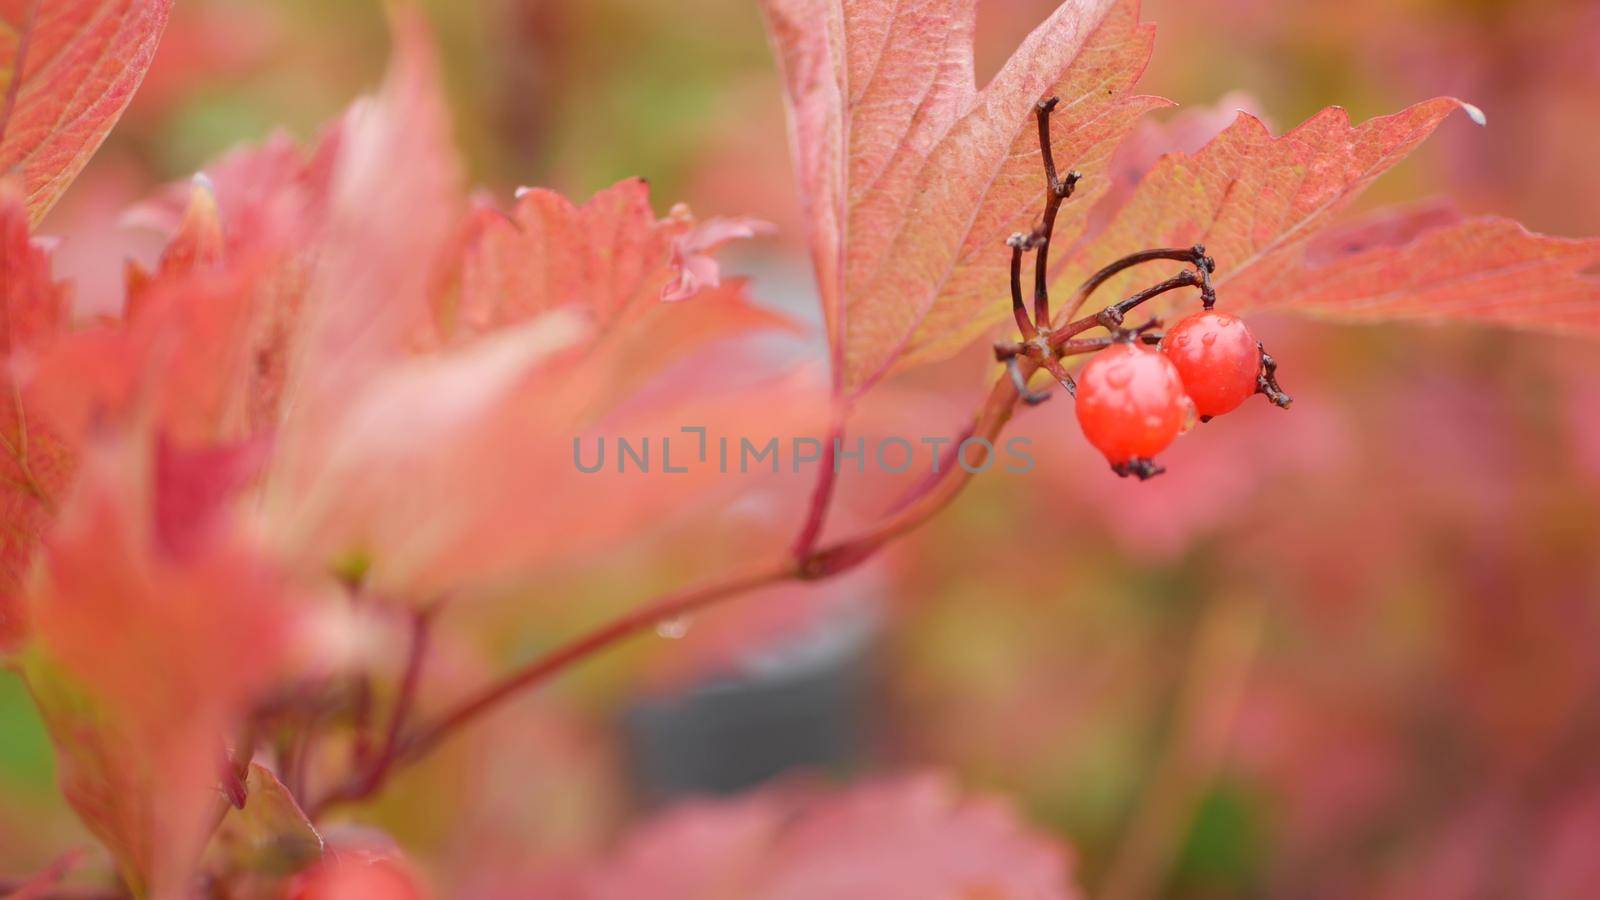 Red autumn guelder rose leaves, wild viburnum berry fall leaf in rainy forest or woods. Wet leafage in september, october or november. Seasonal foliage in moist woodland. Small water drops or droplets